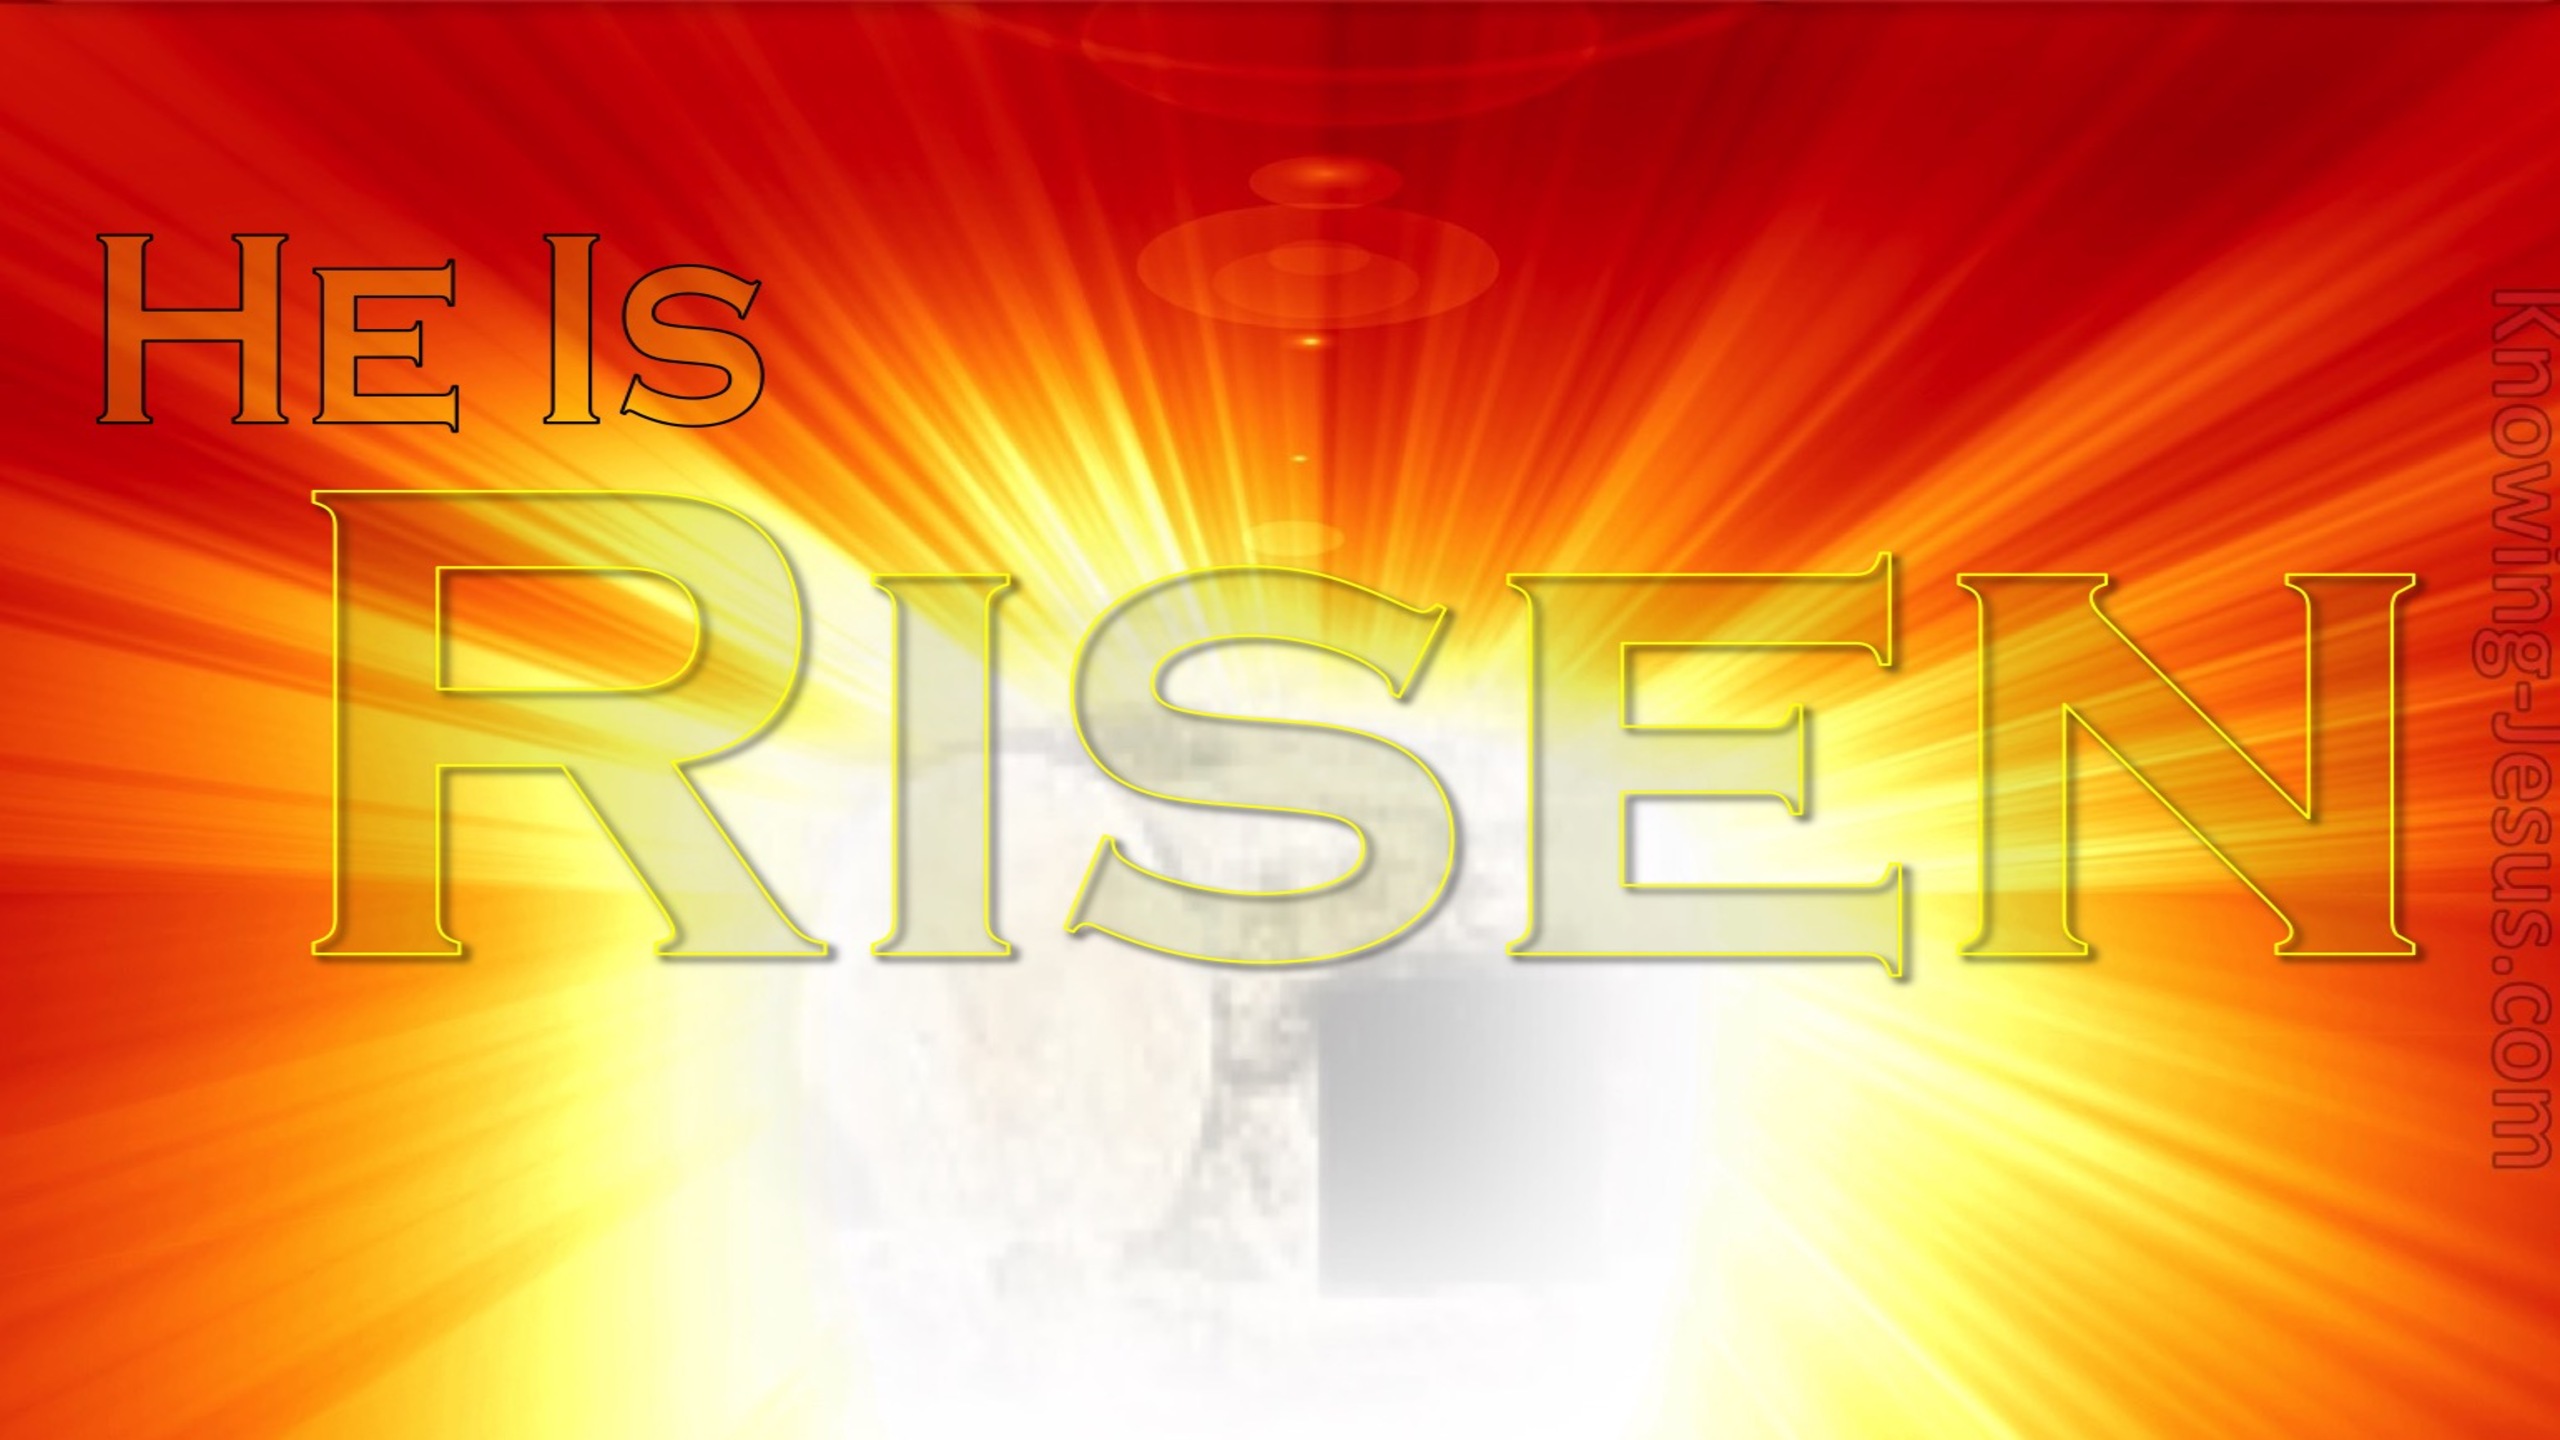 Philippians 3:11 The Power of His Resurrection (devotional)01:12 (red)